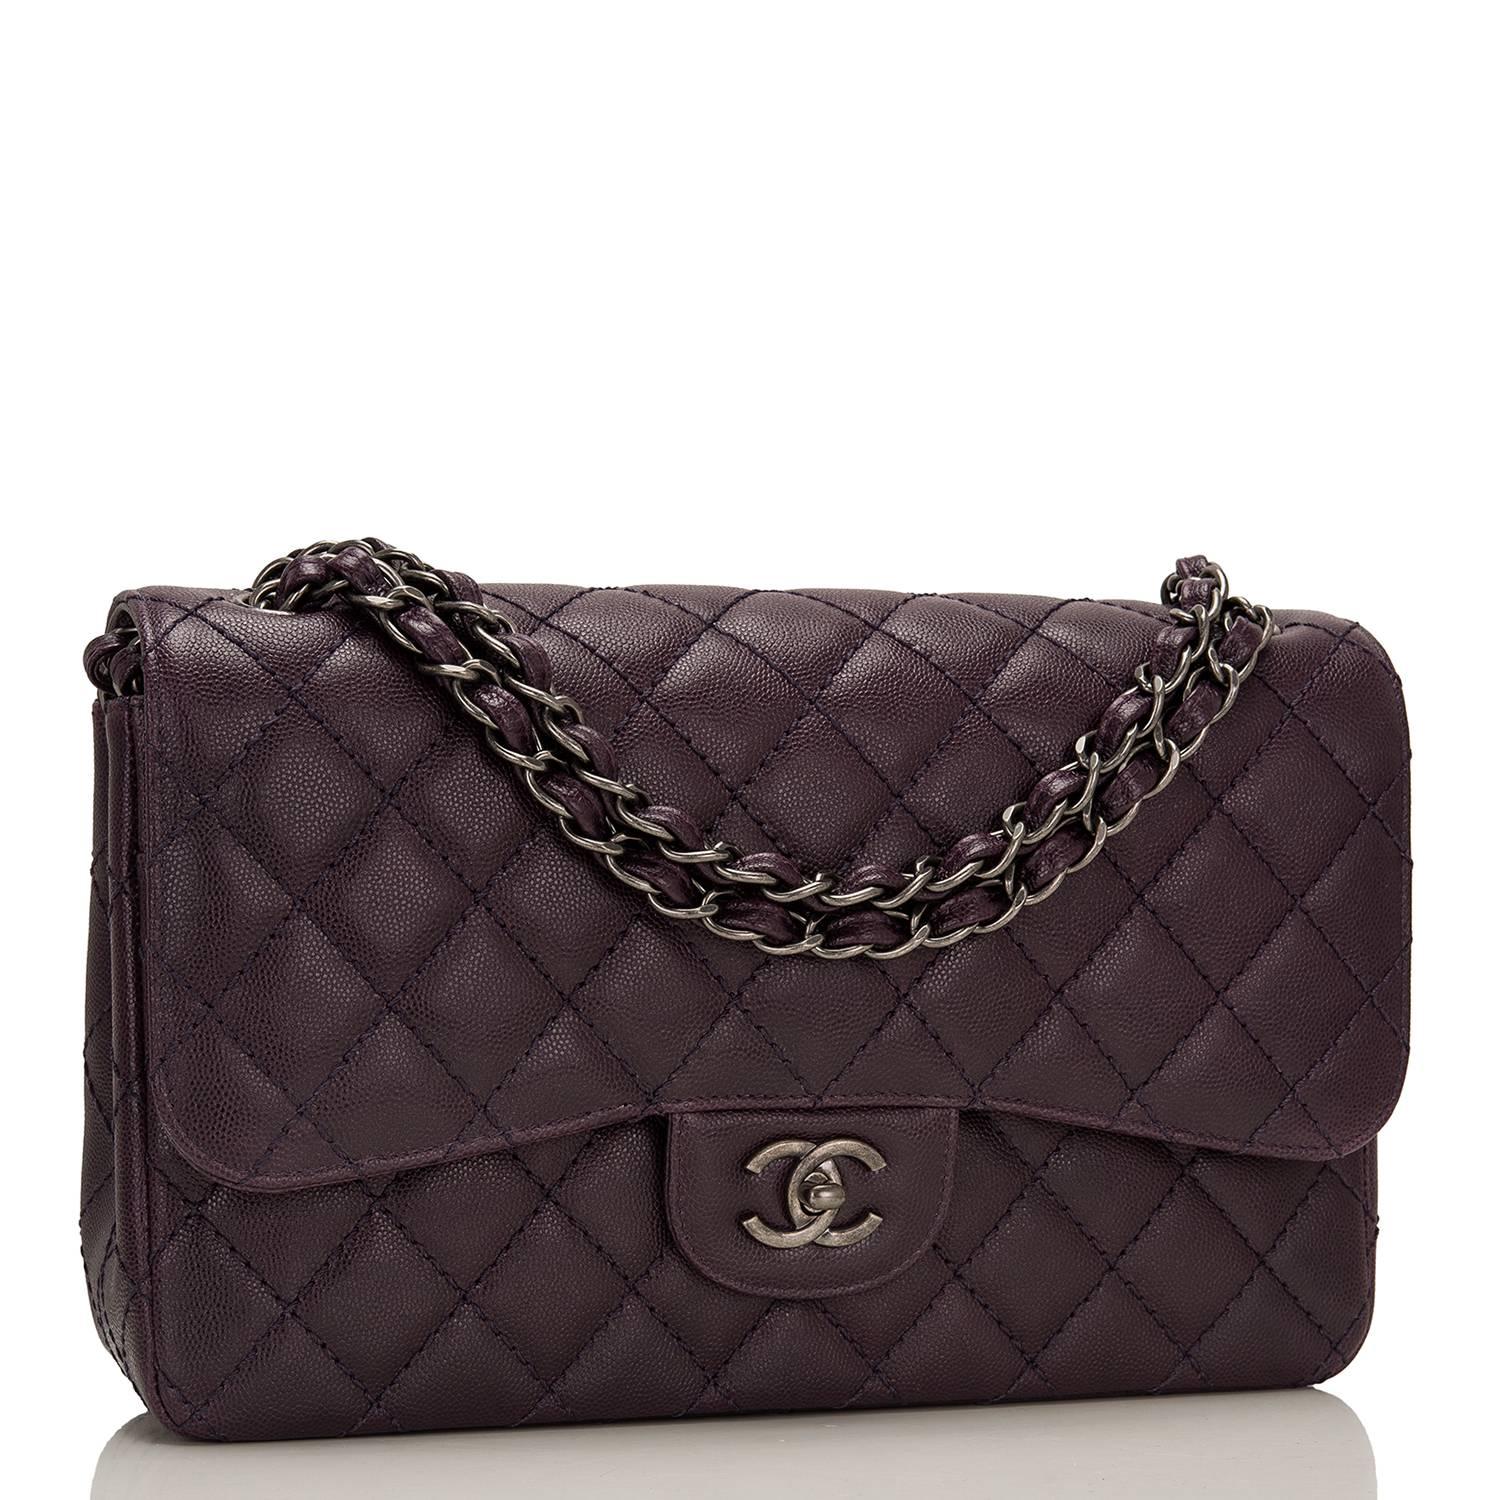 Chanel Jumbo Classic Double flap bag of dark purple quilted caviar leather and accented with aged ruthenium hardware.

The bag features a front flap with signature CC turnlock closure, a half moon back pocket, and an adjustable interwoven aged